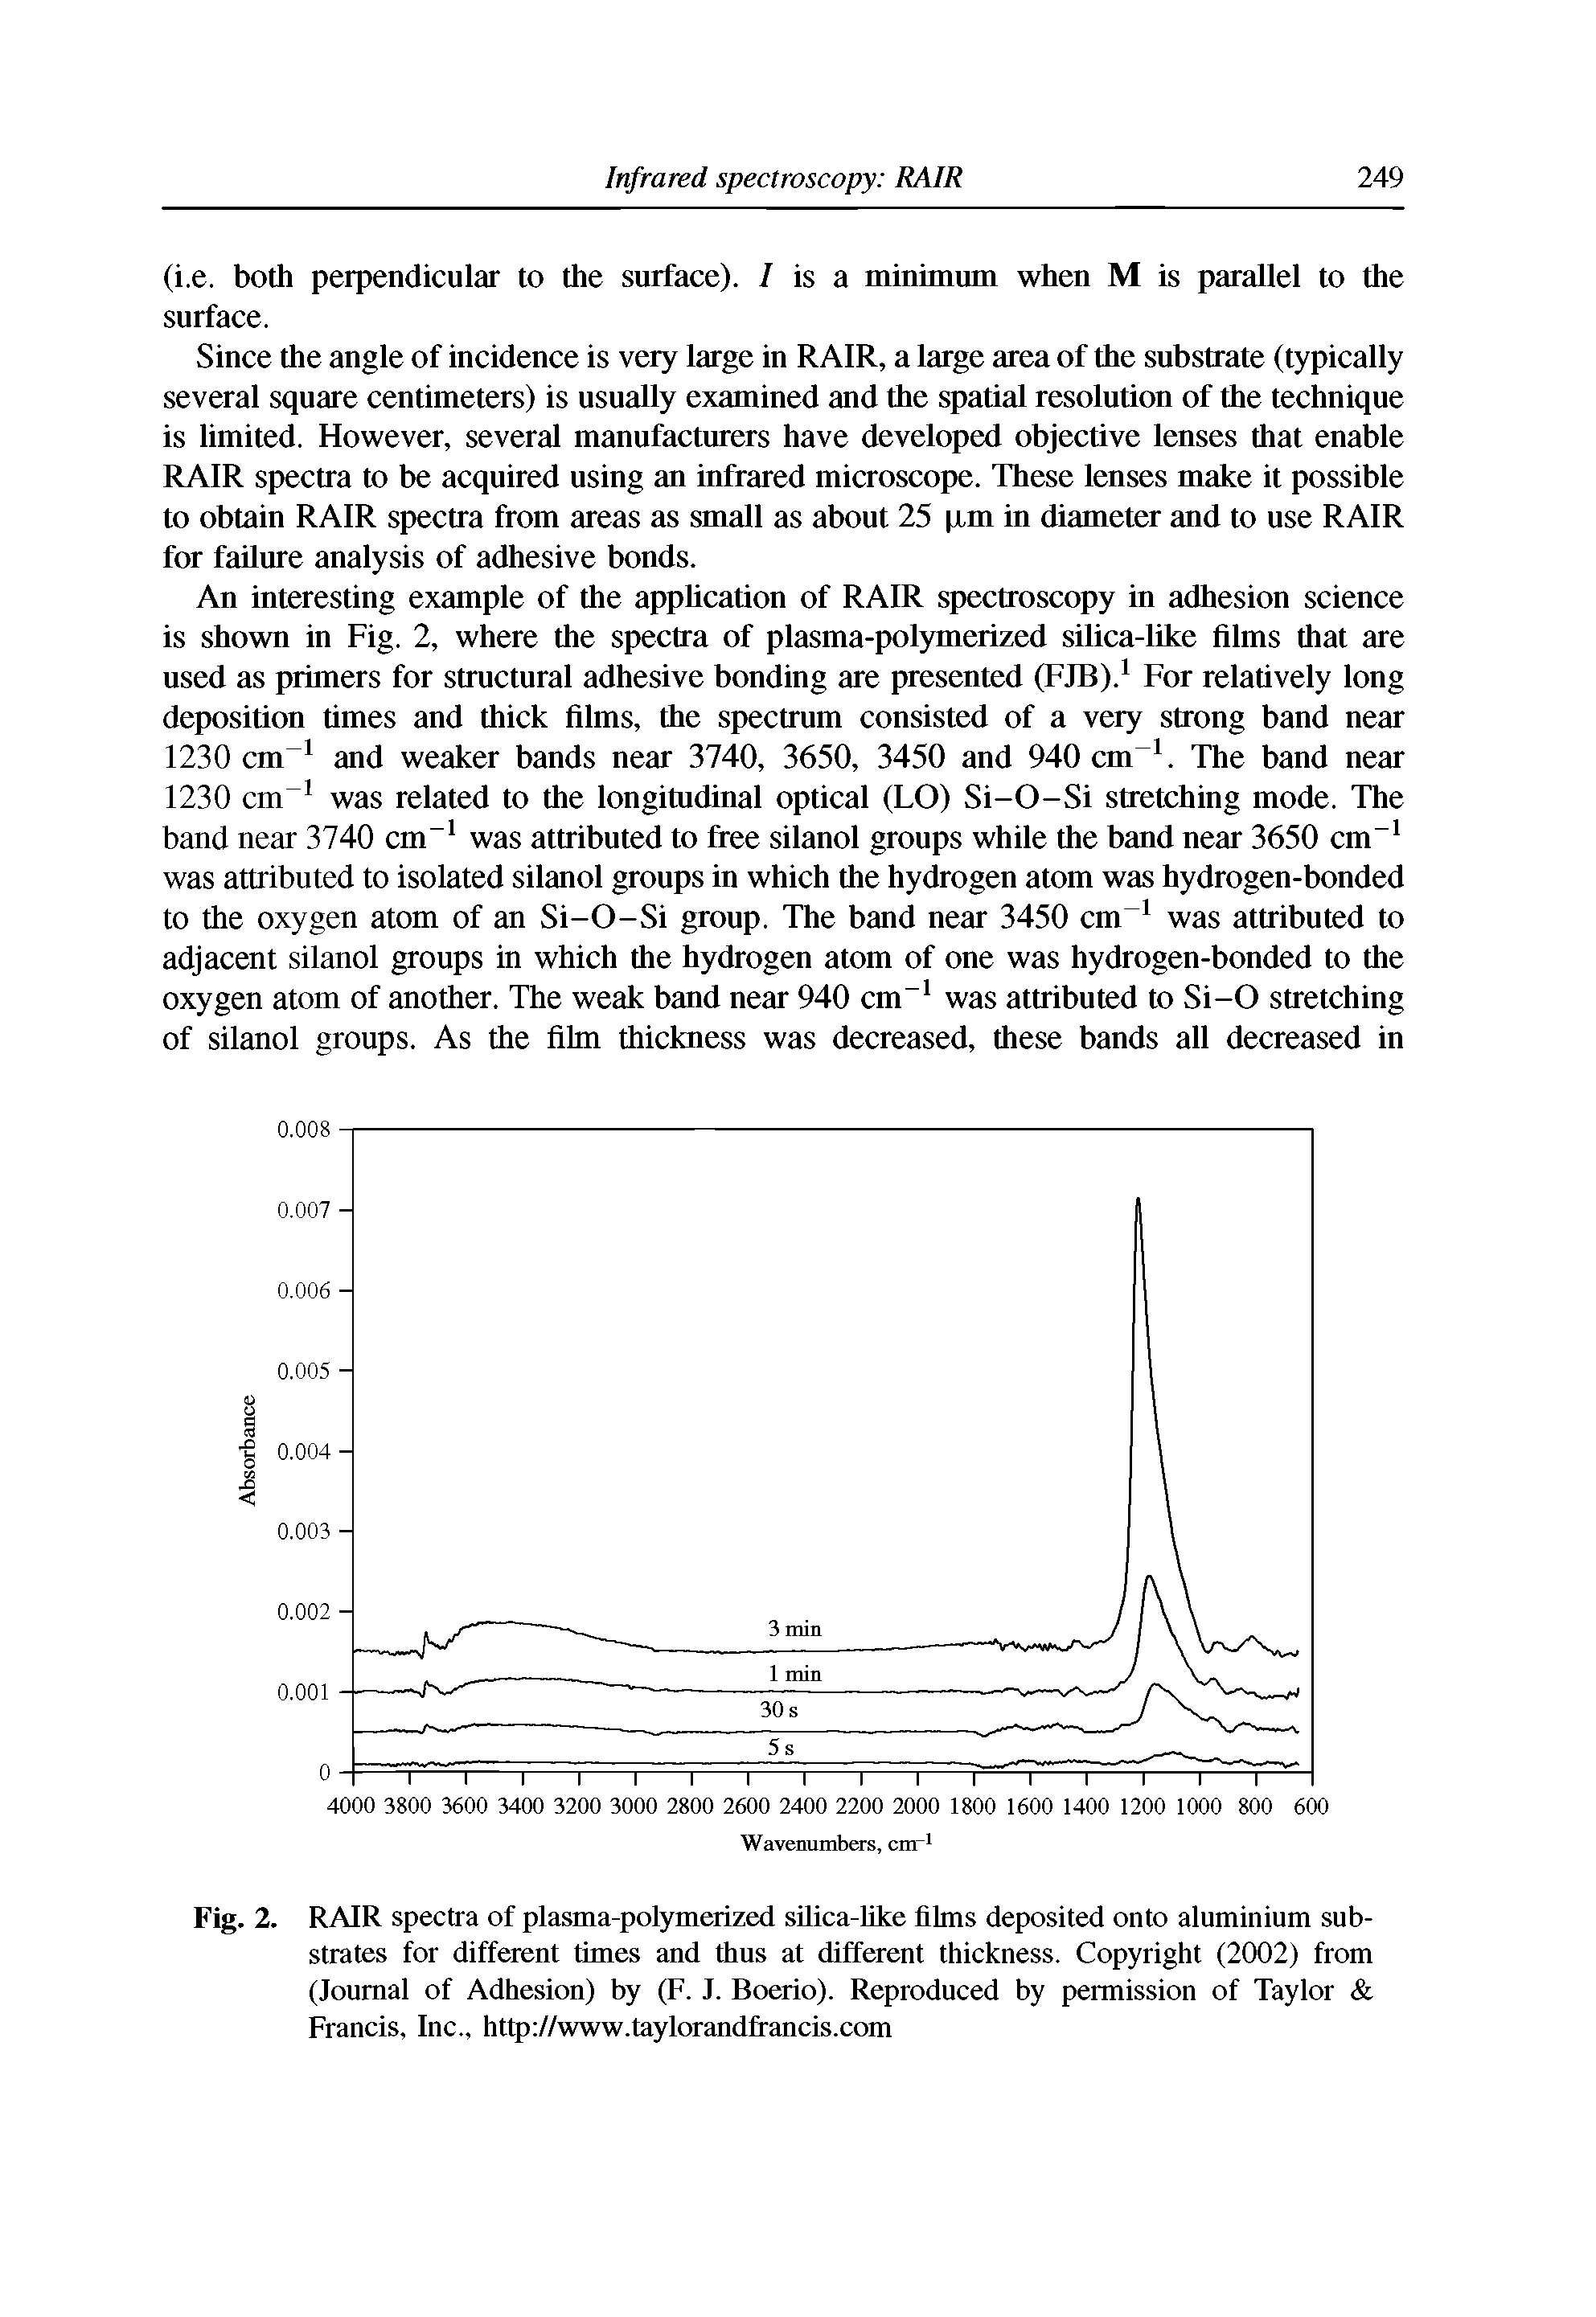 Fig. 2. RAIR spectra of plasma-polymaized siUca-like films deposited onto aluminium substrates for diffoent times and thus at diffaent thickness. Copyright (2002) from (Journal of Adhesion) by (F. J. Boaio). Reproduced by permission of Taylor Francis, Inc., http //www.taylorandfrancis.com...